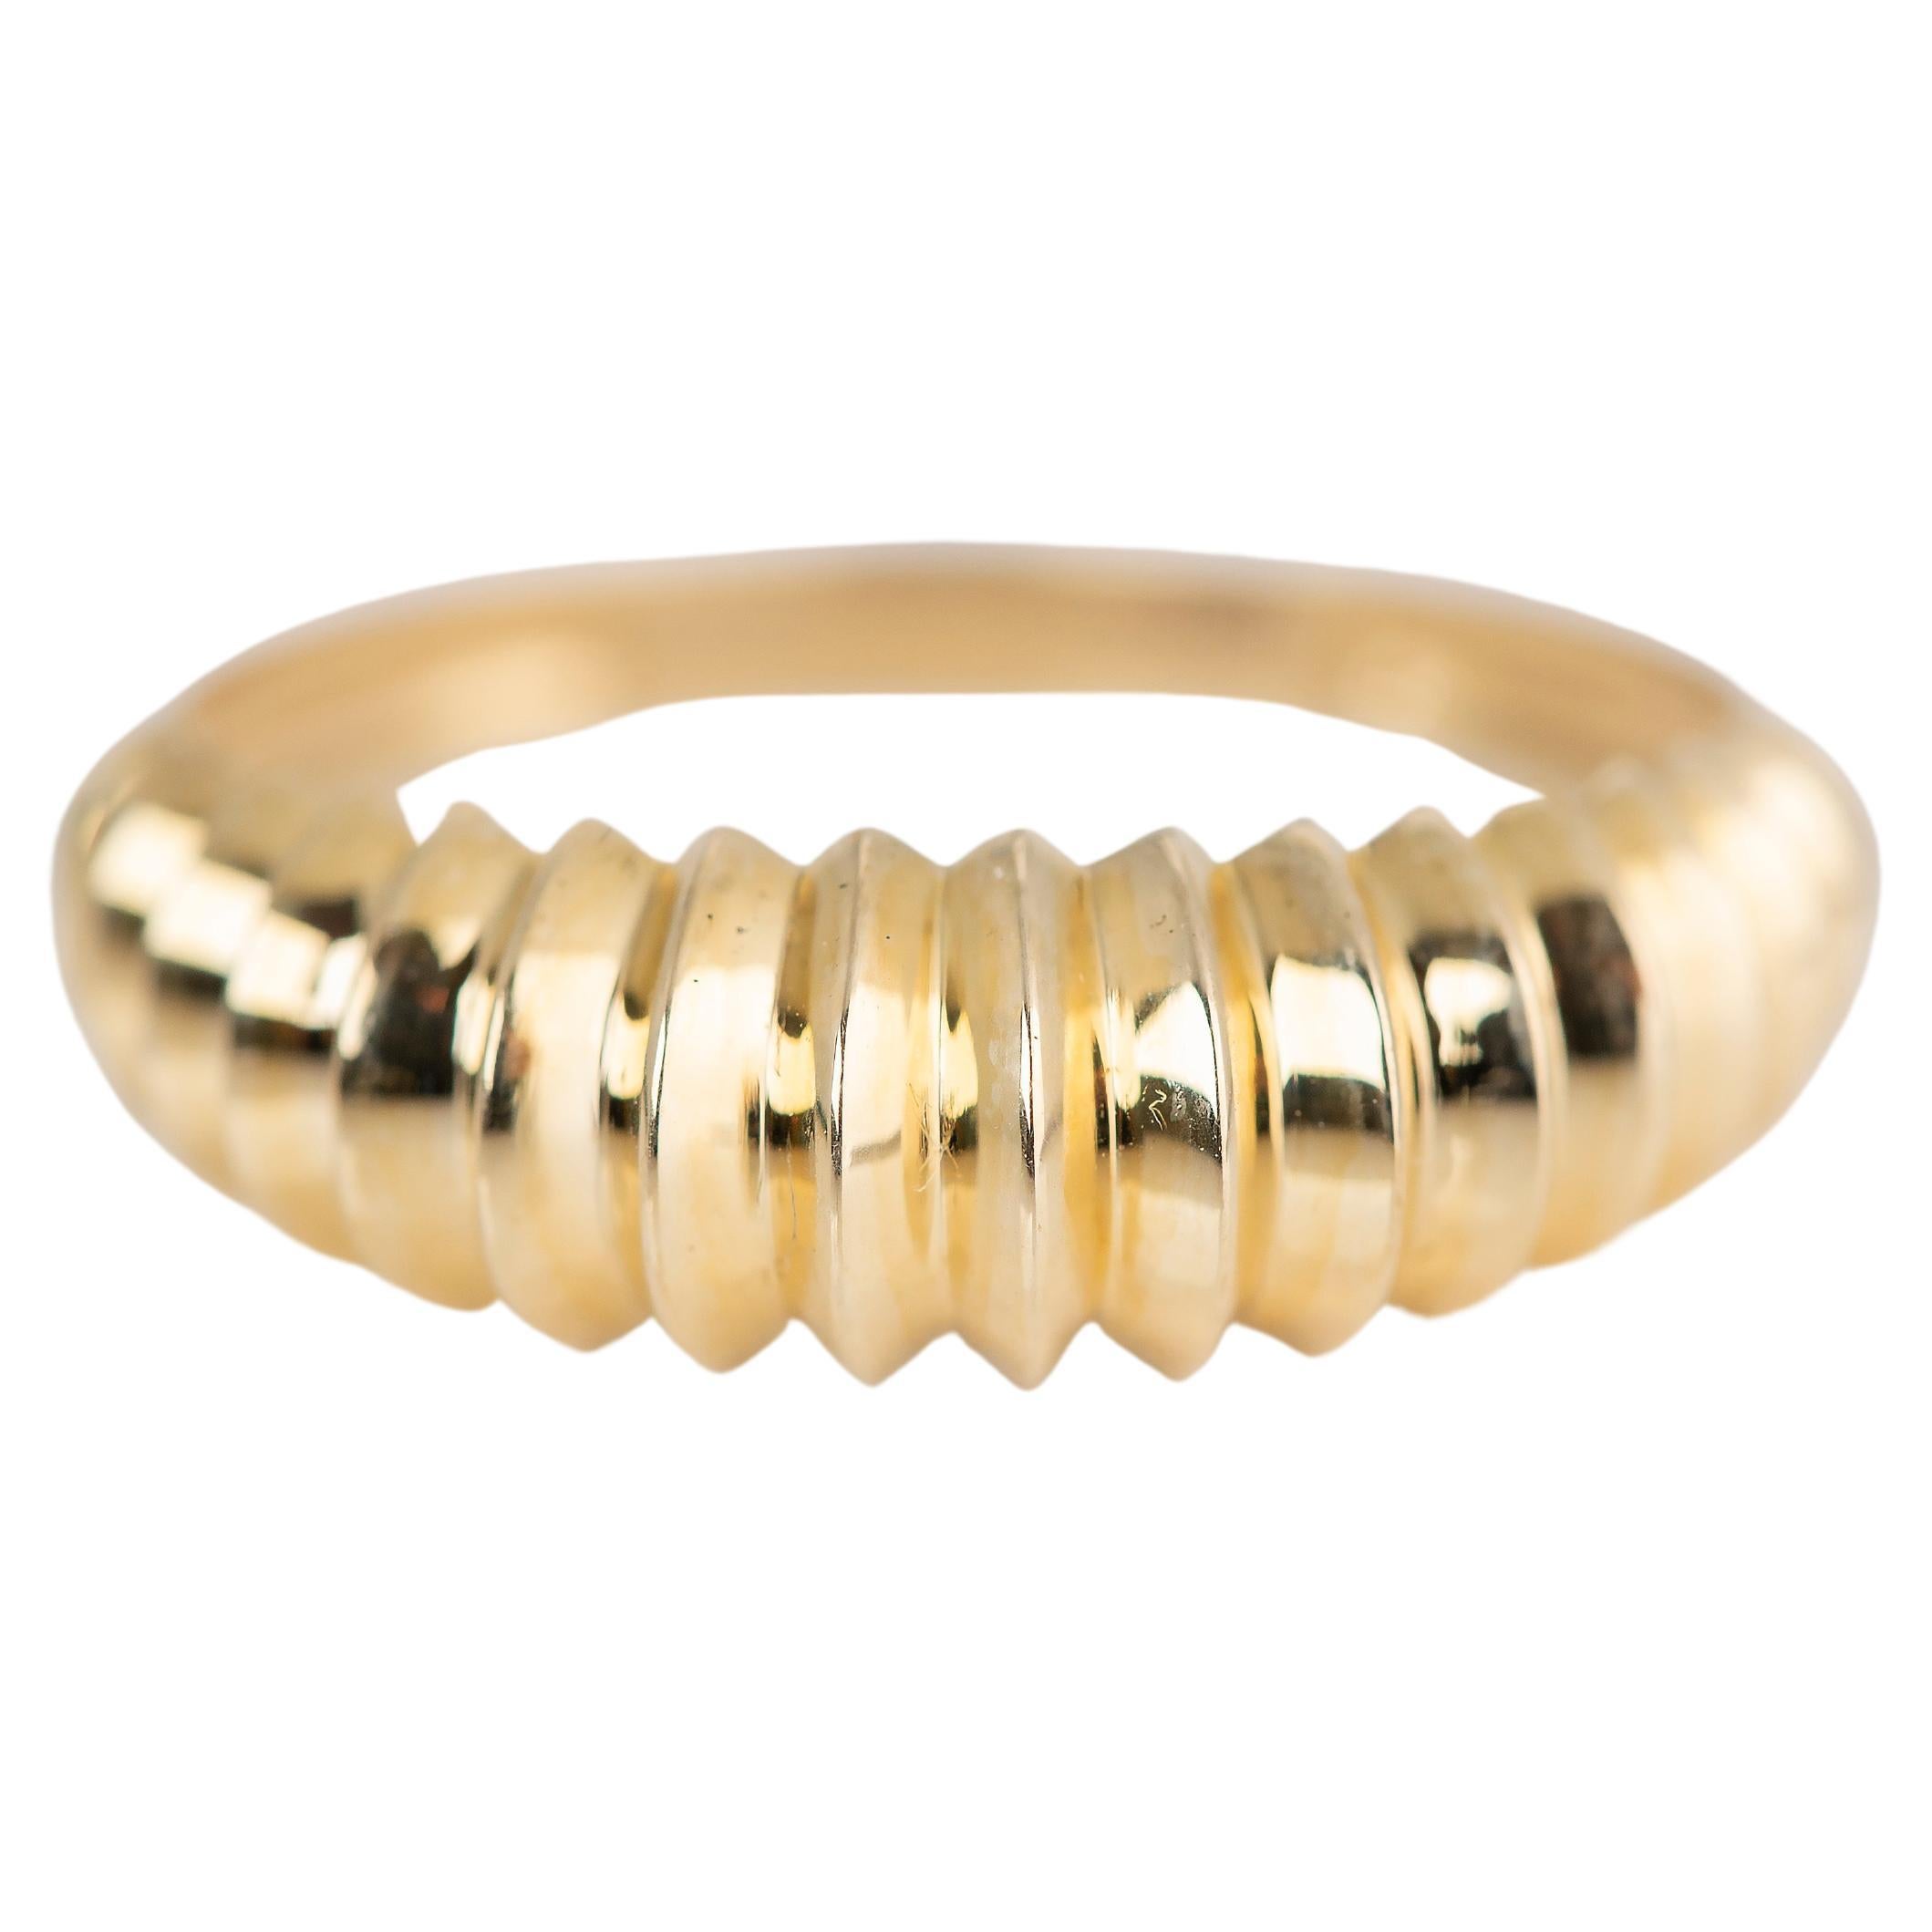 For Sale:  Croissant Ring, Dome Croissant Ring, 14K Gold Croissant Ring